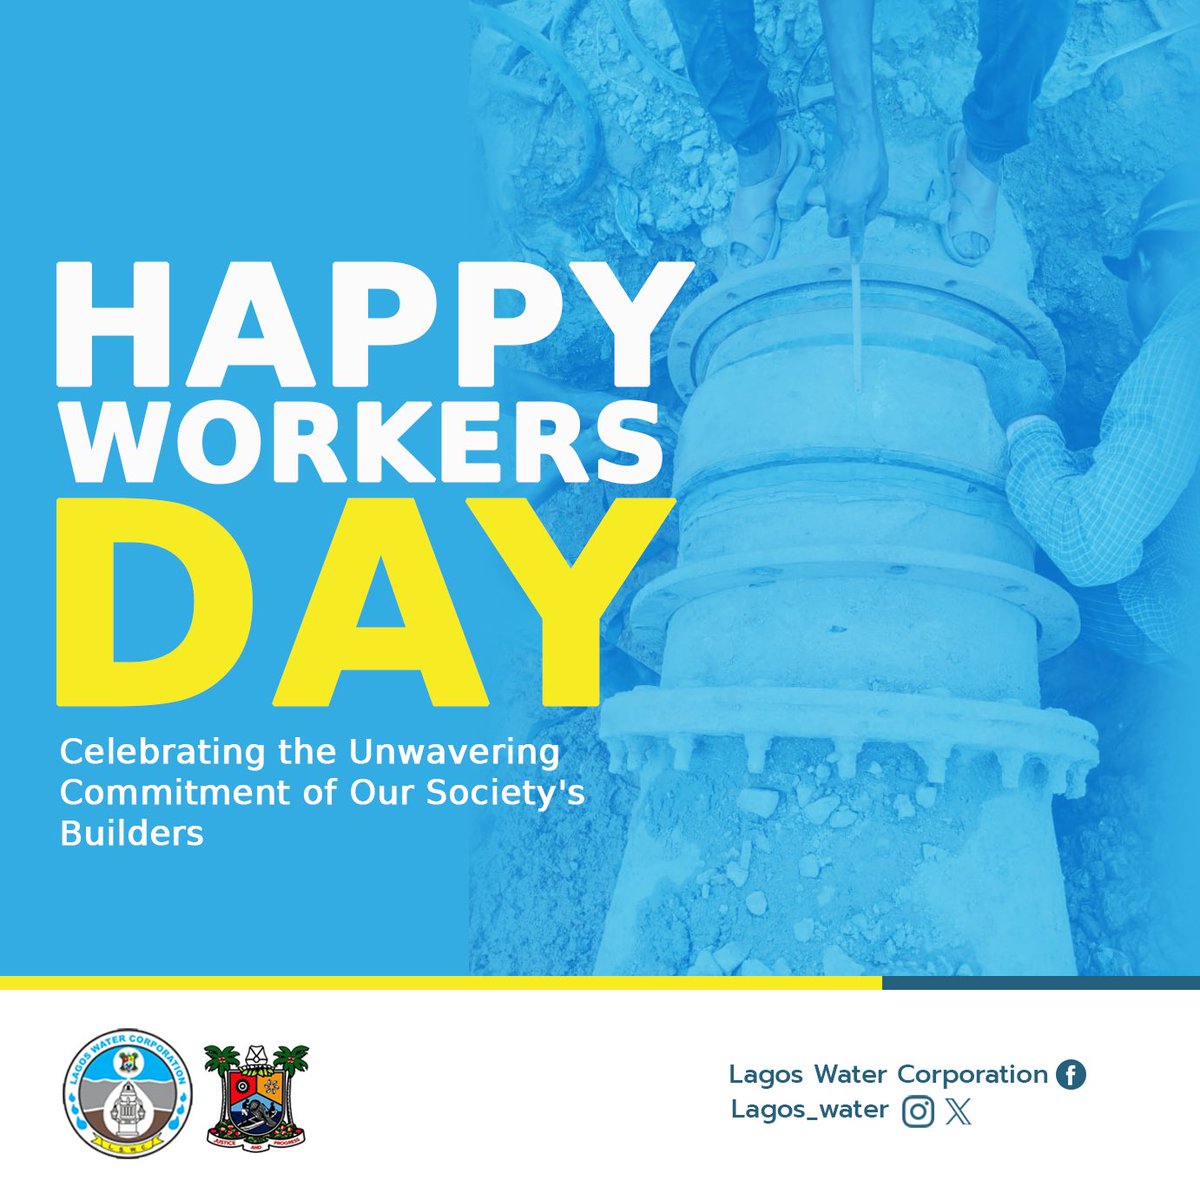 Happy Workers' Day. It's a great opportunity to appreciate the dedication and hard work of our staff members and all the individuals who contribute to making our world a better place.